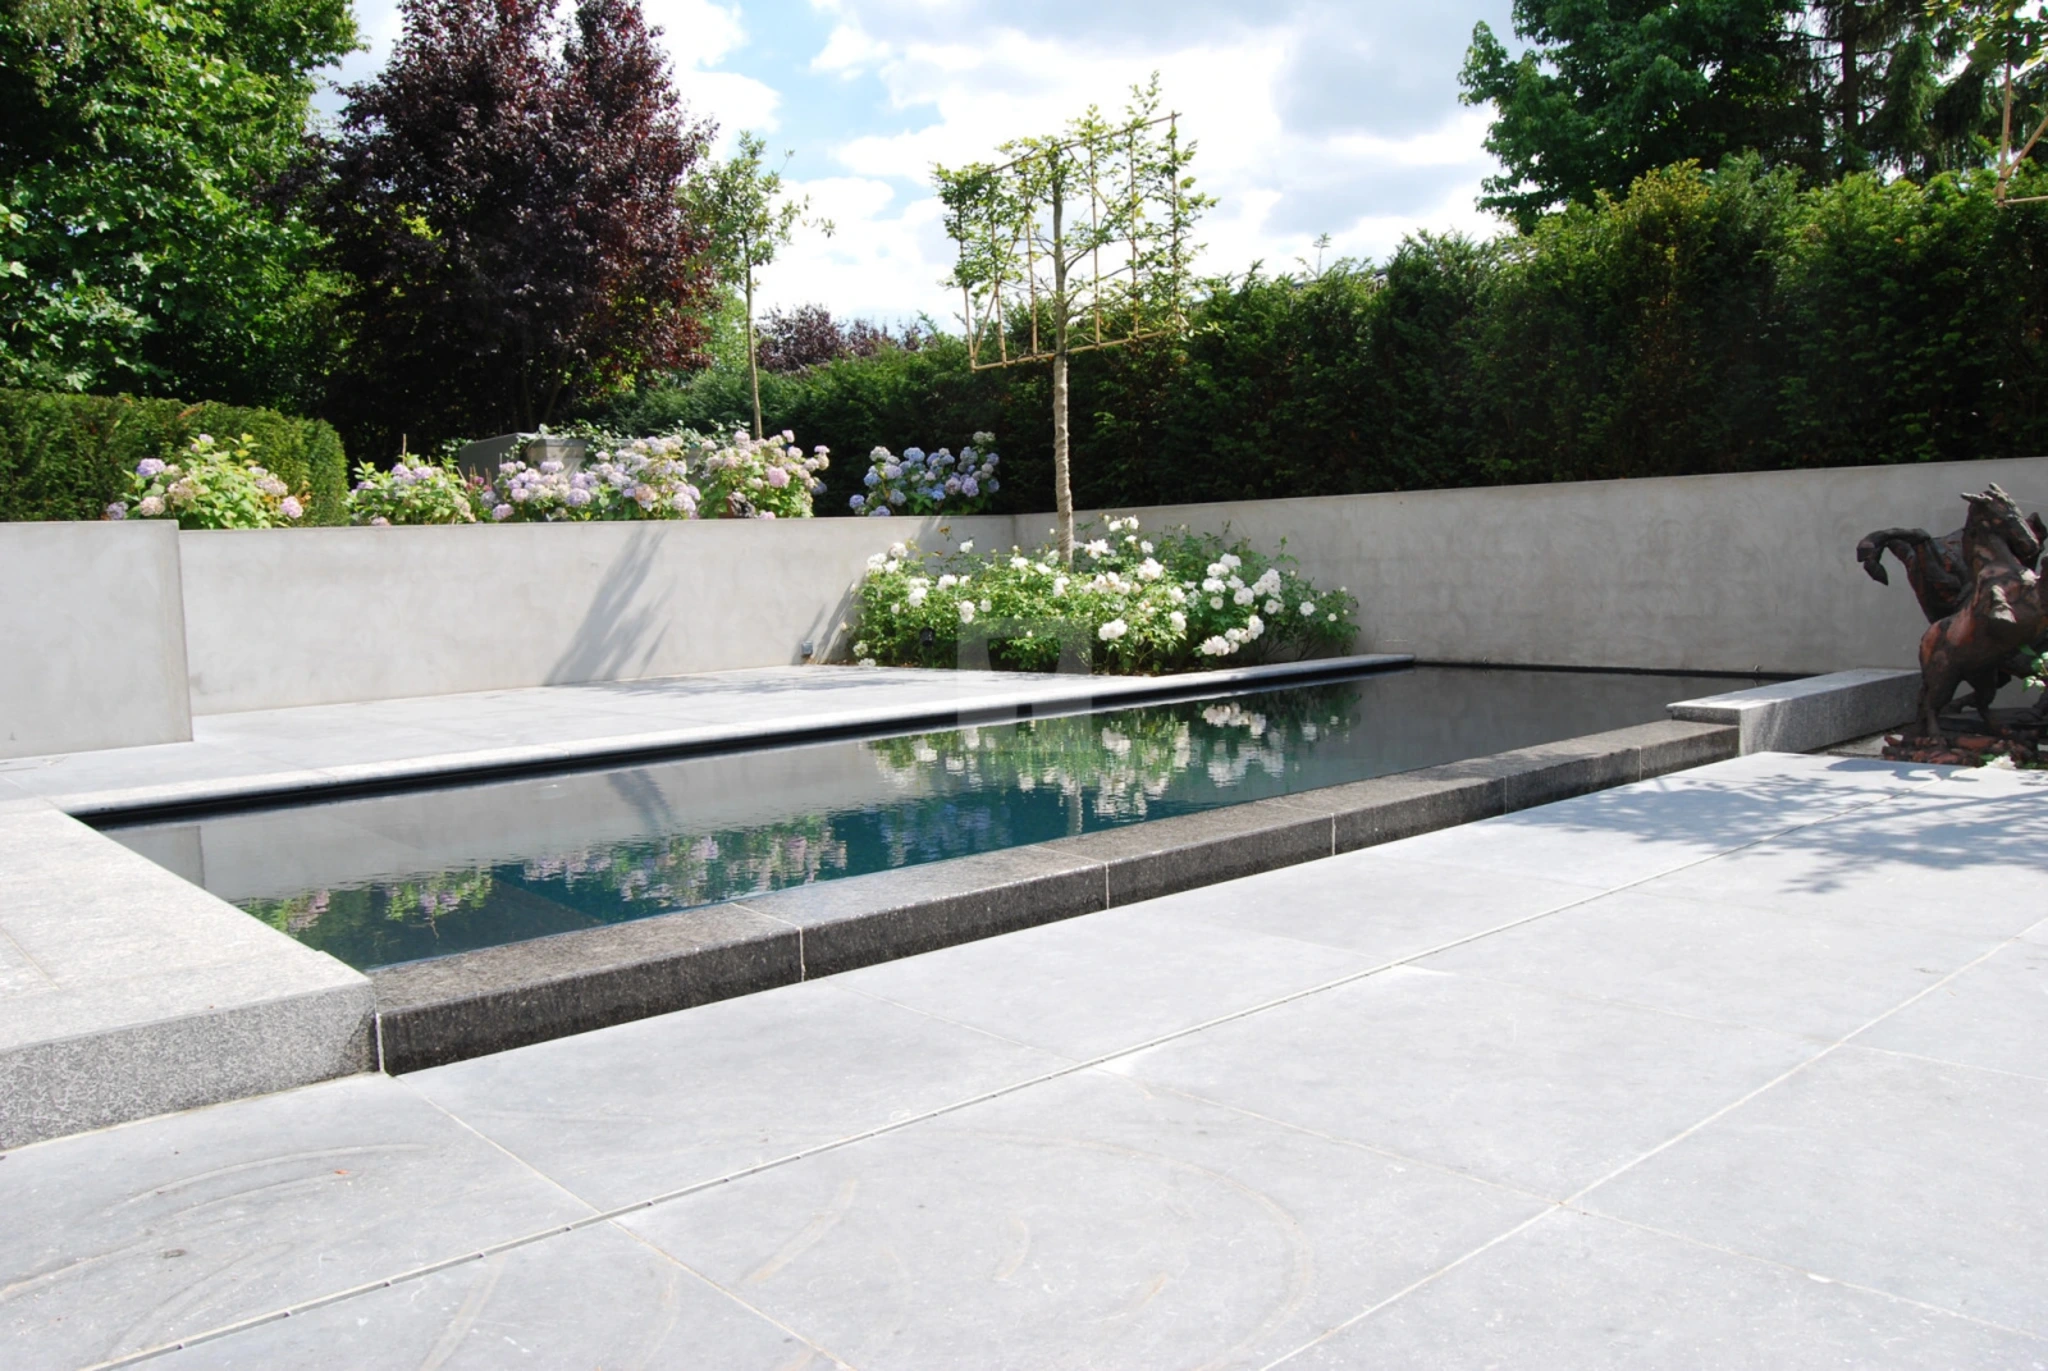 Belgian Bluestone and water: relaxation and comfort